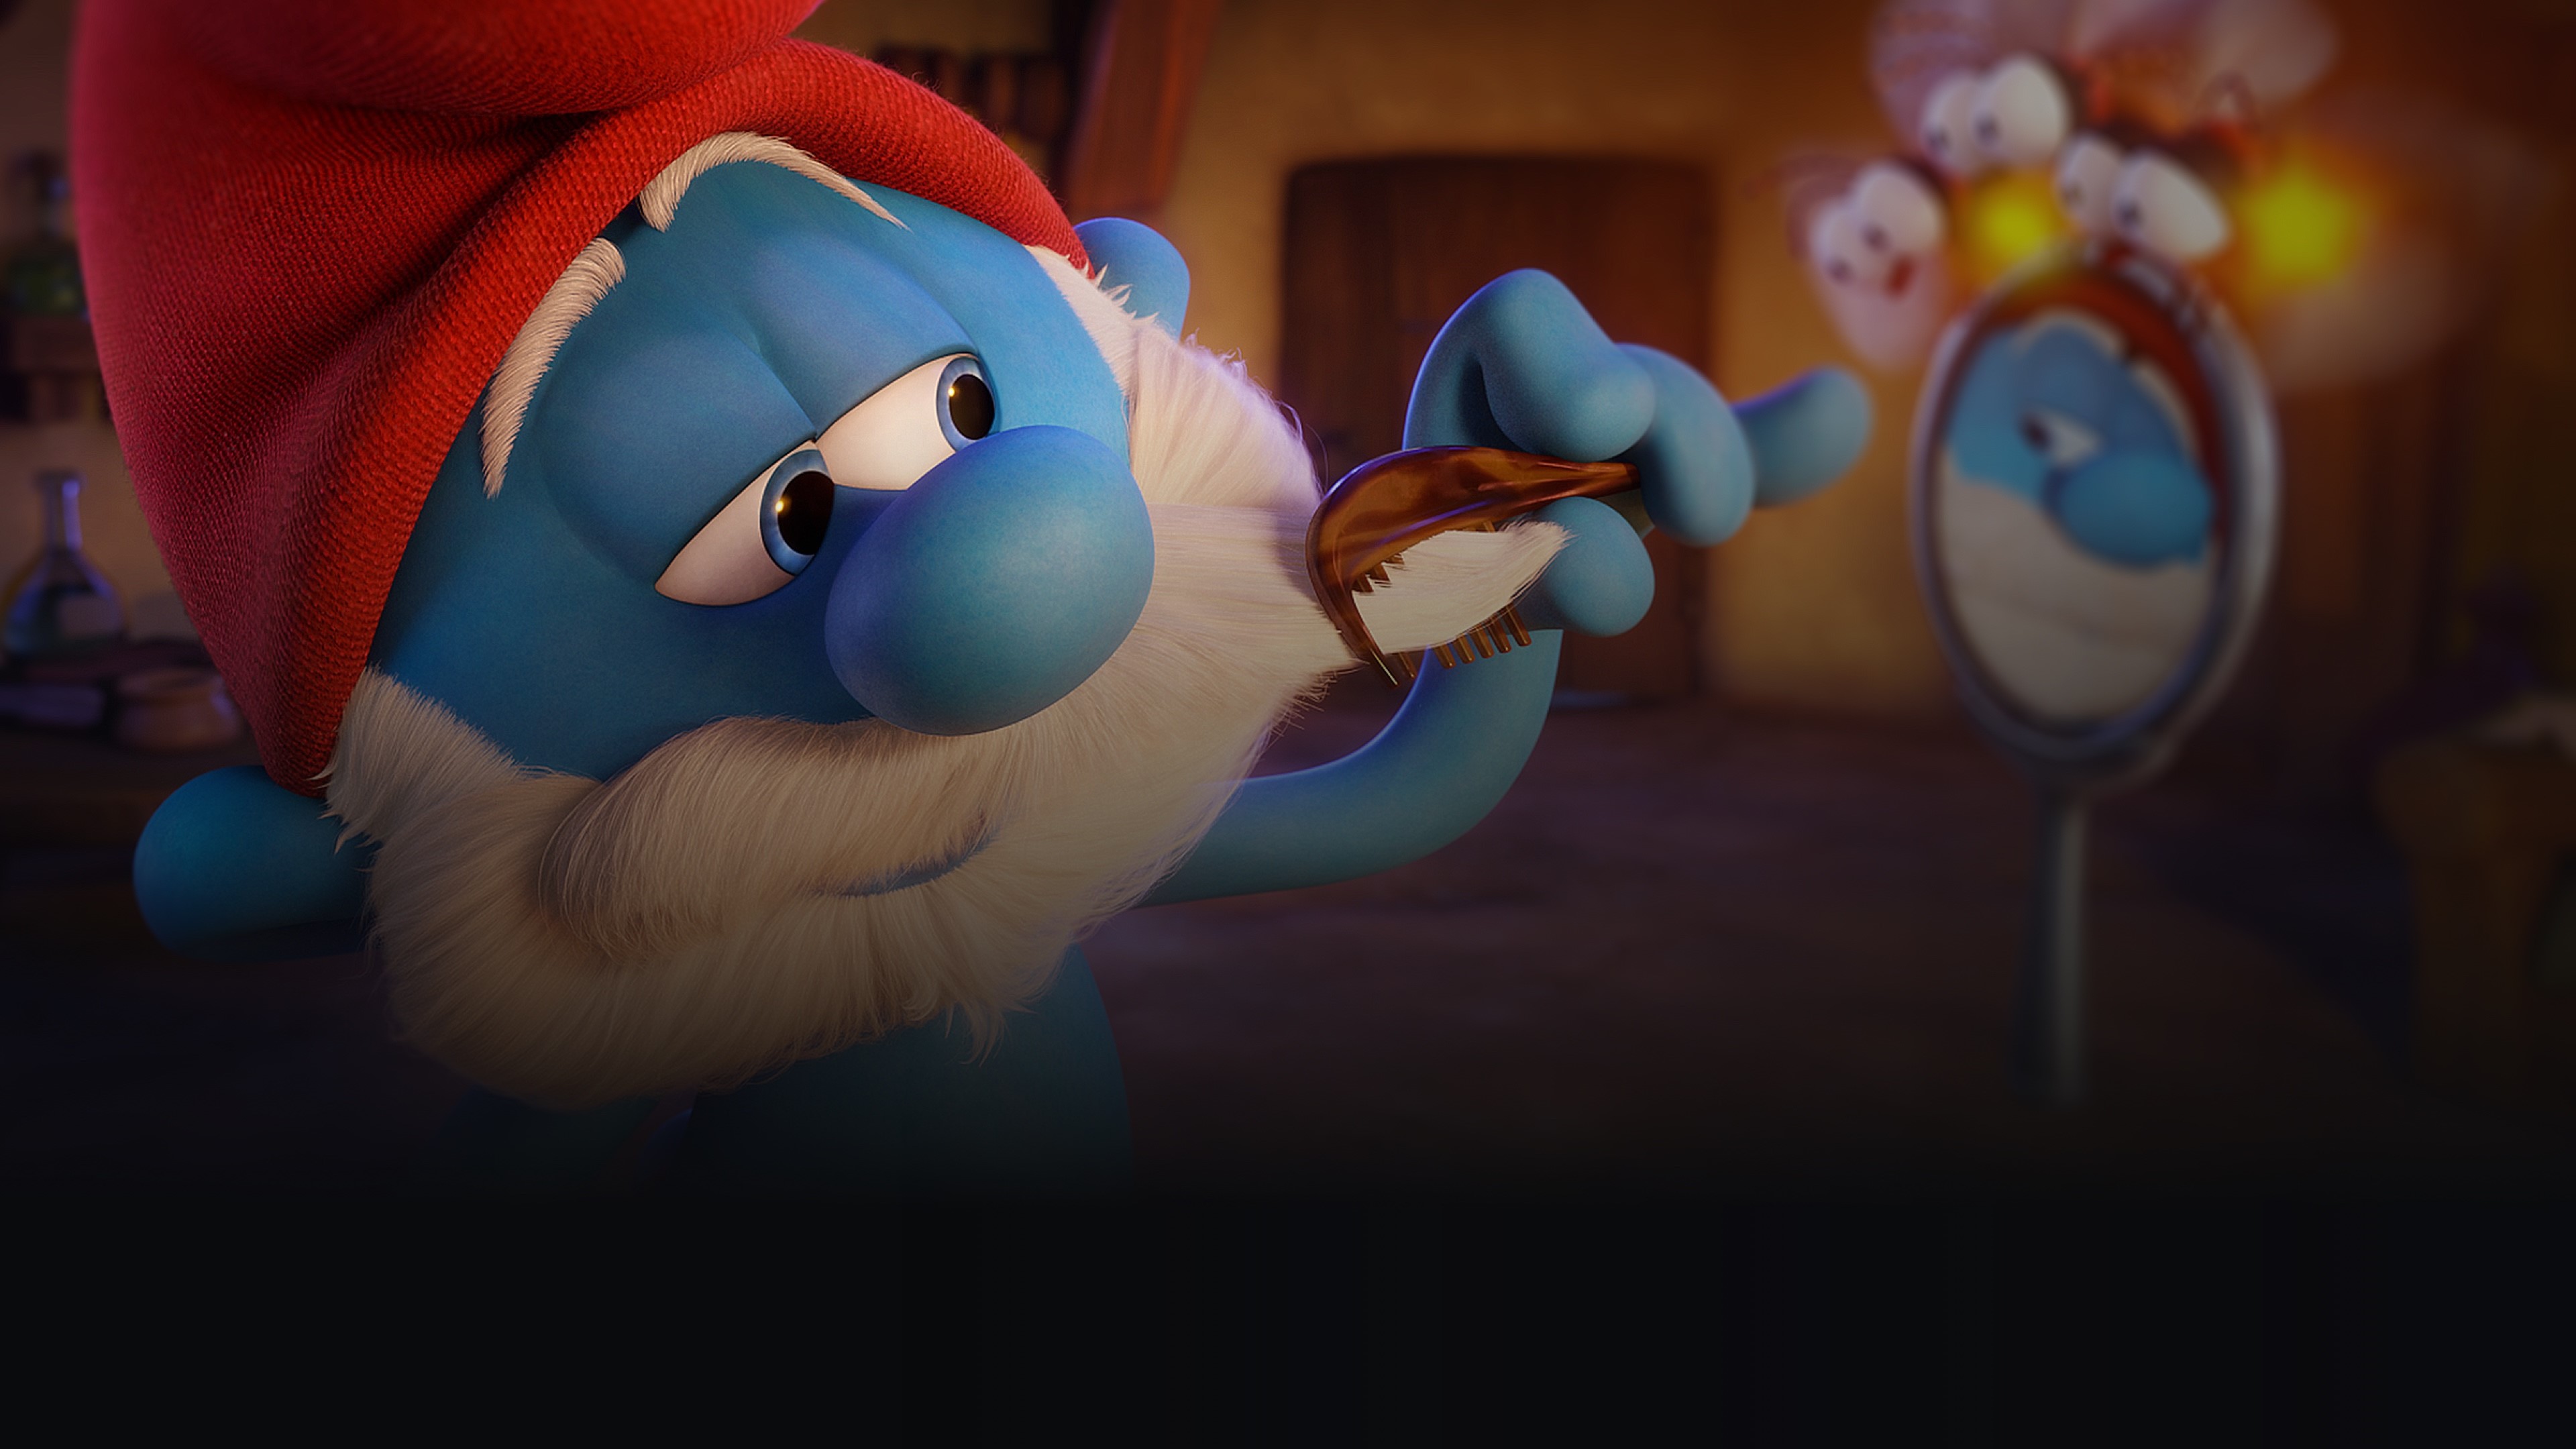 Wallpaper / smurfs, animated movies, movies, 2017 movies, hd, 4k free download